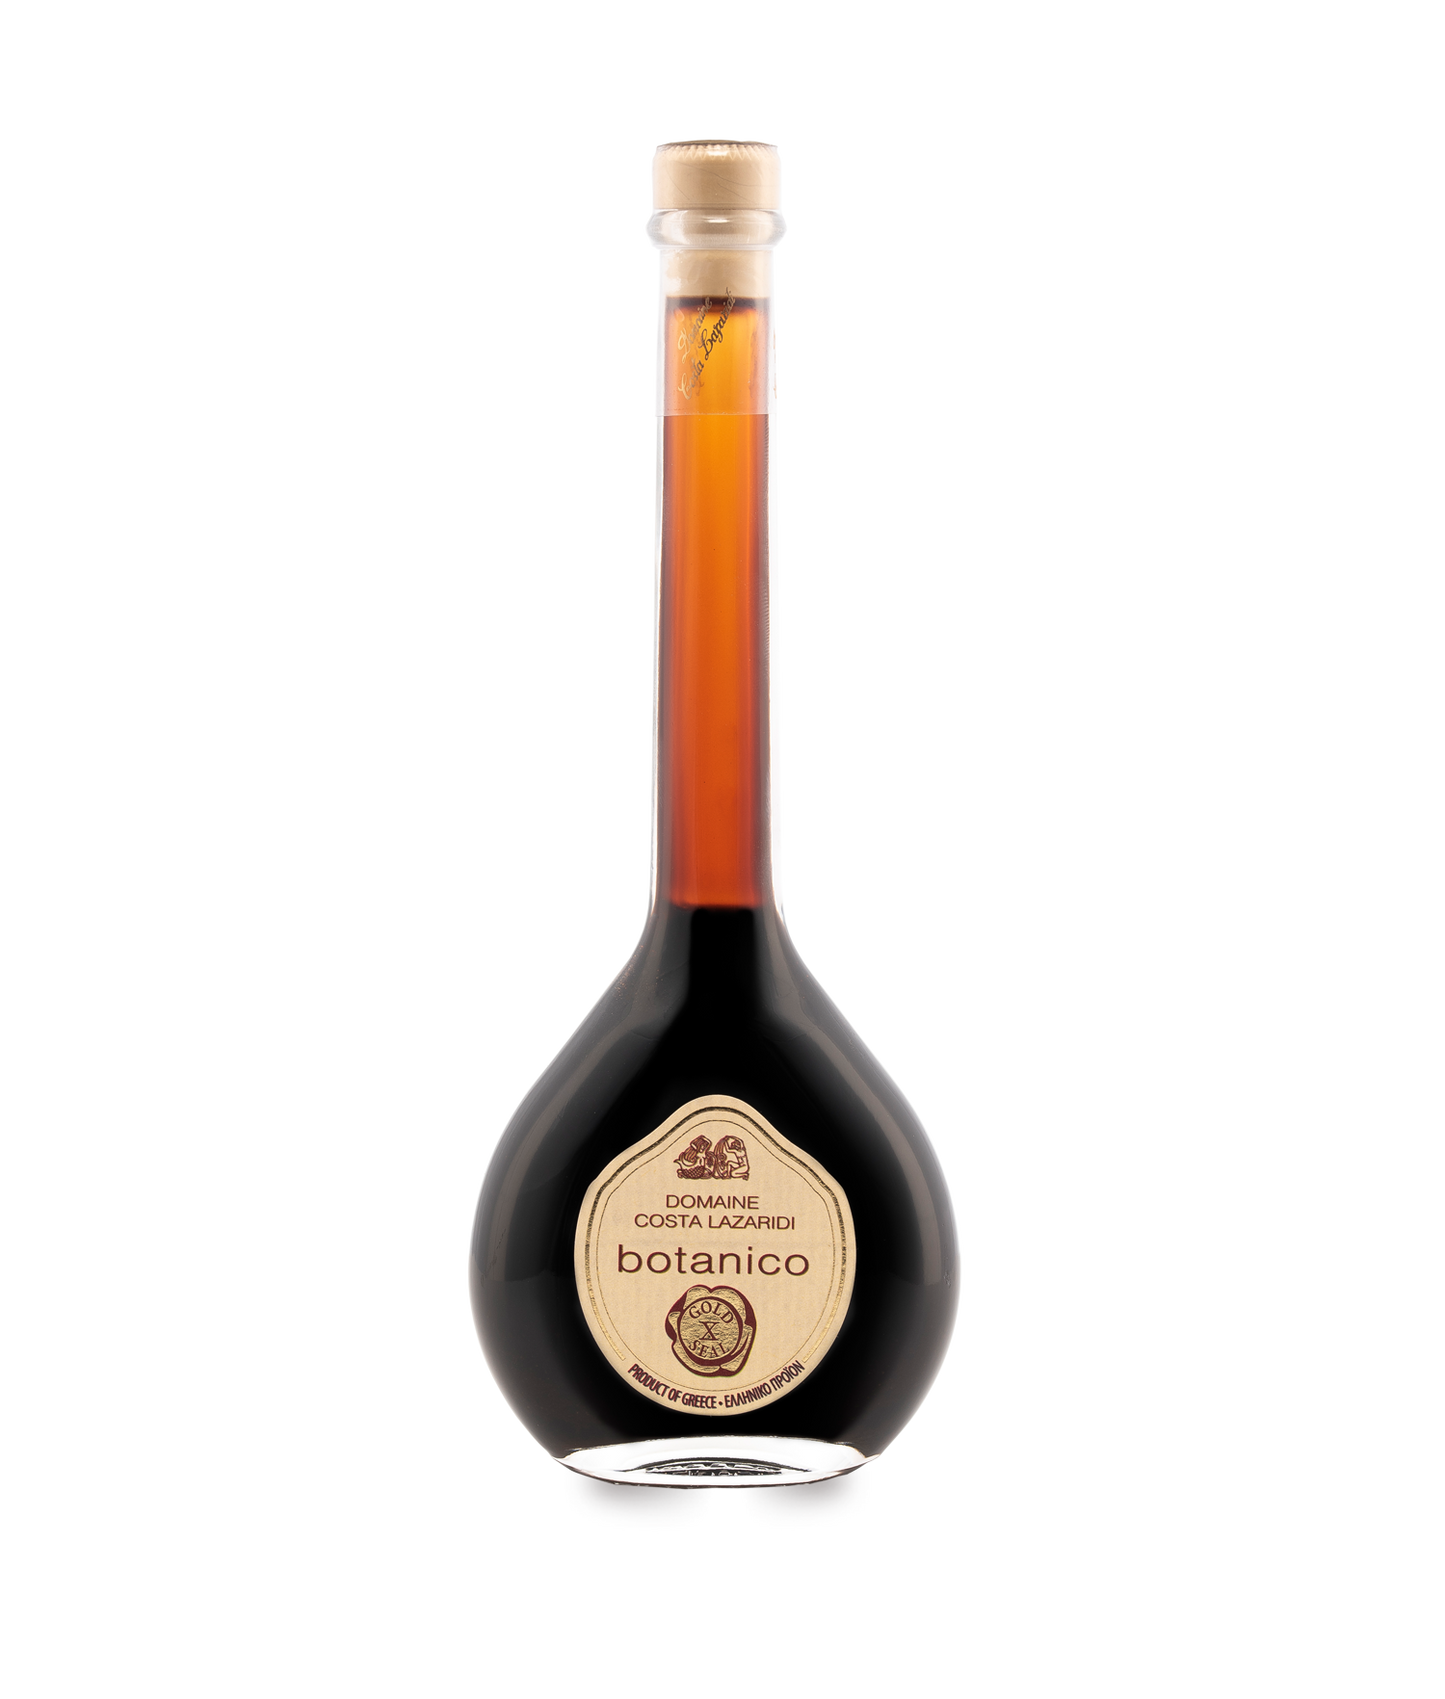 Botanico Balsamic Gold Seal. Imported and distributed by Alpha Omega Imports